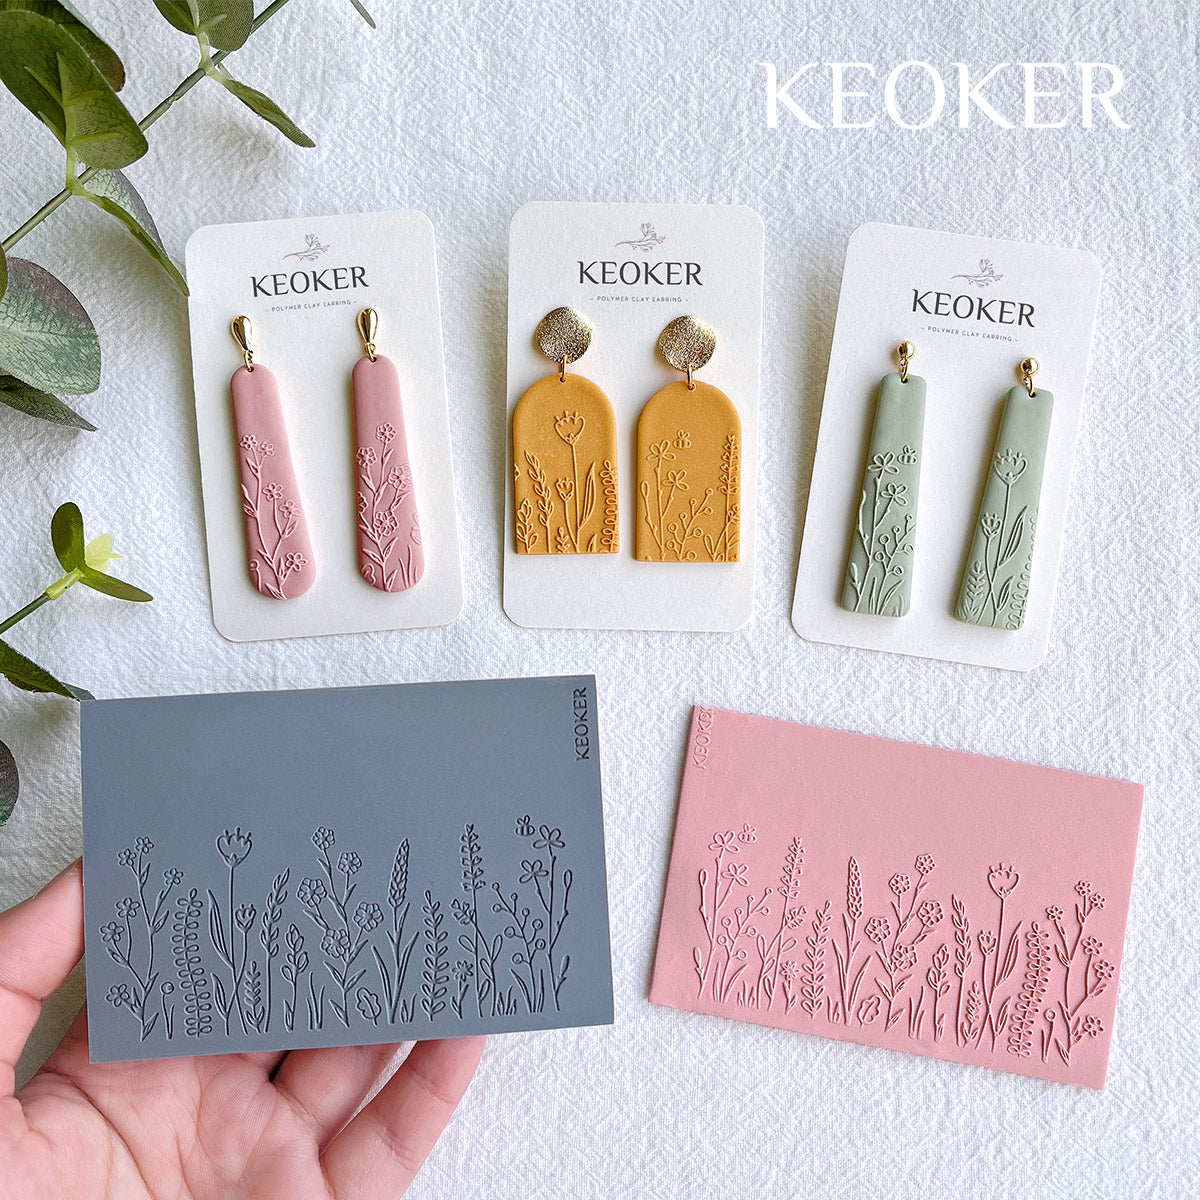 Keoker Polymer Clay Texture Sheets, Clay Texture Mat for Making